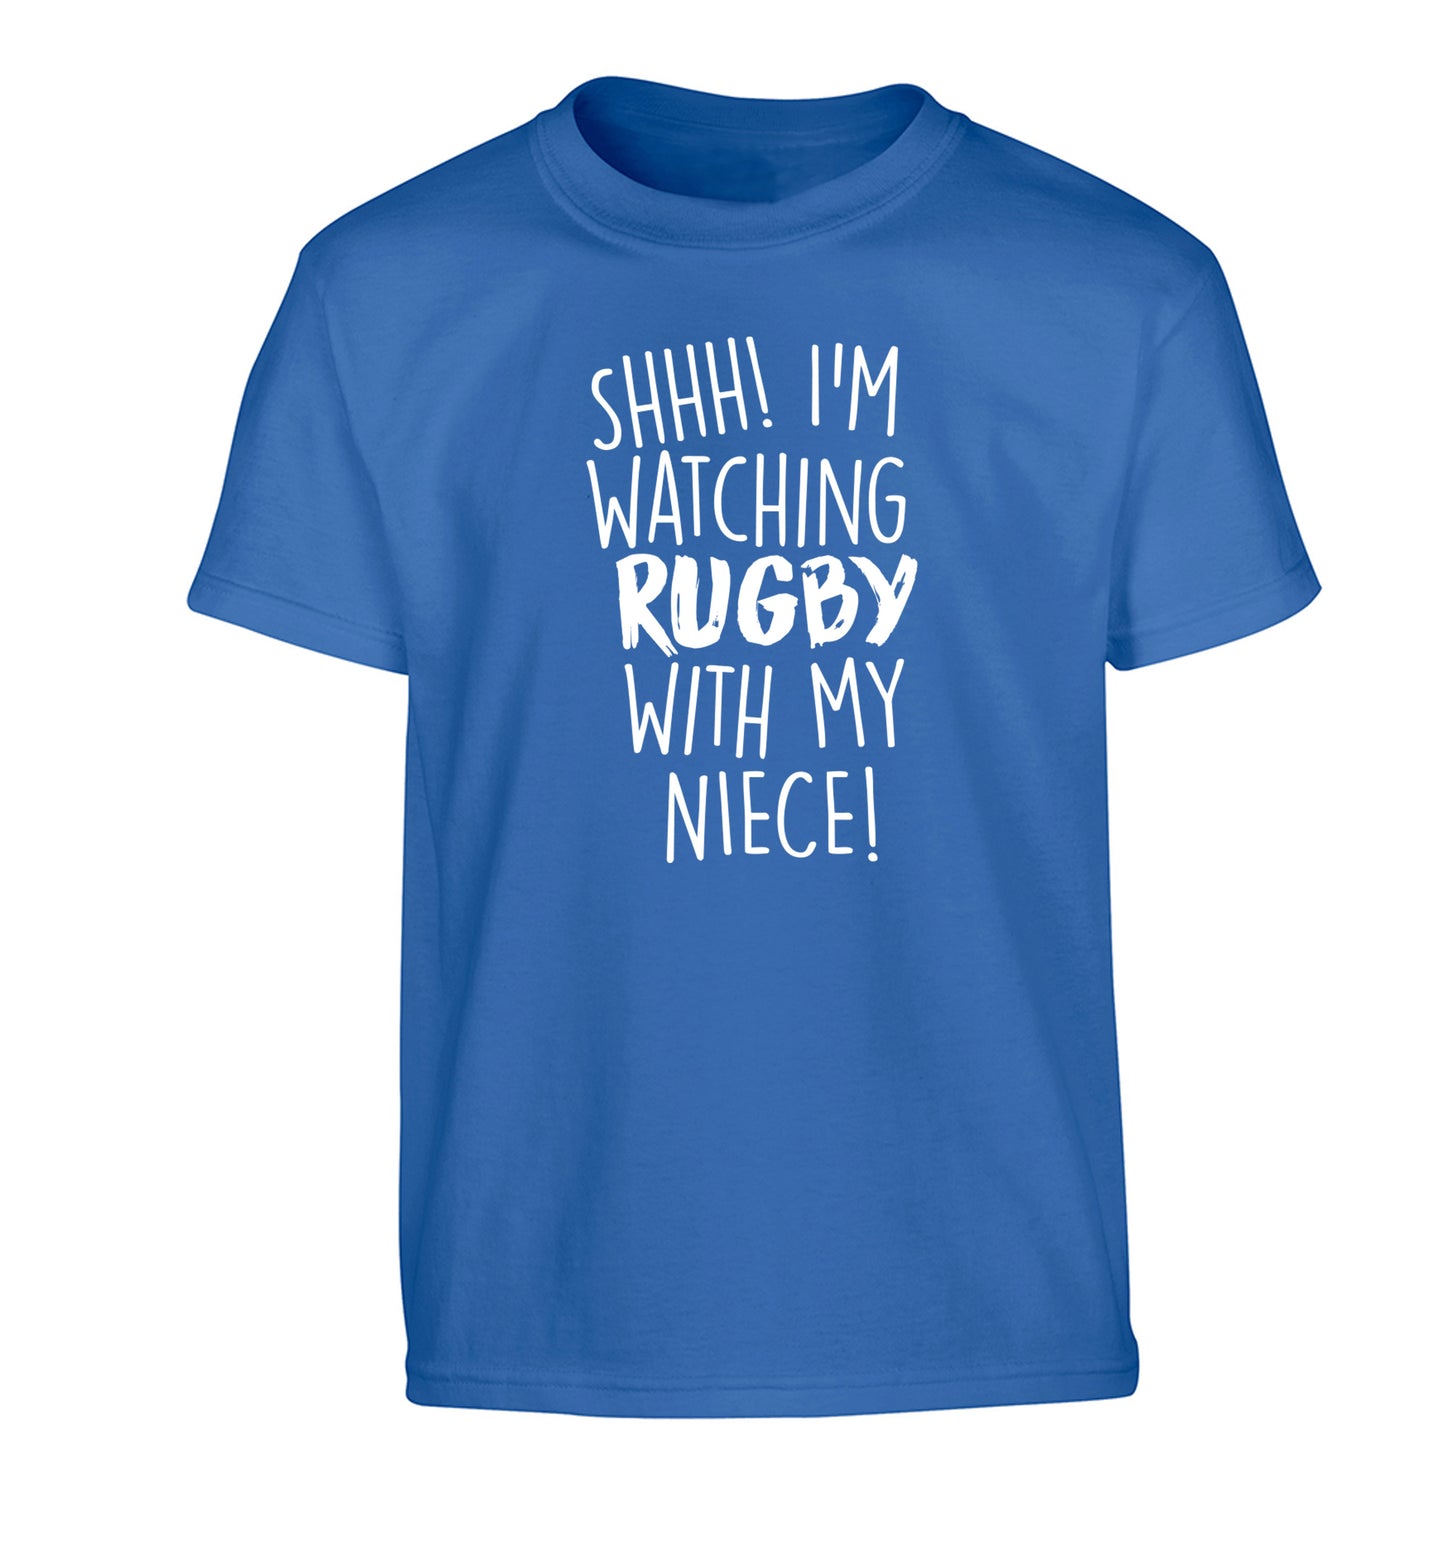 Shh.. I'm watching rugby with my niece Children's blue Tshirt 12-13 Years